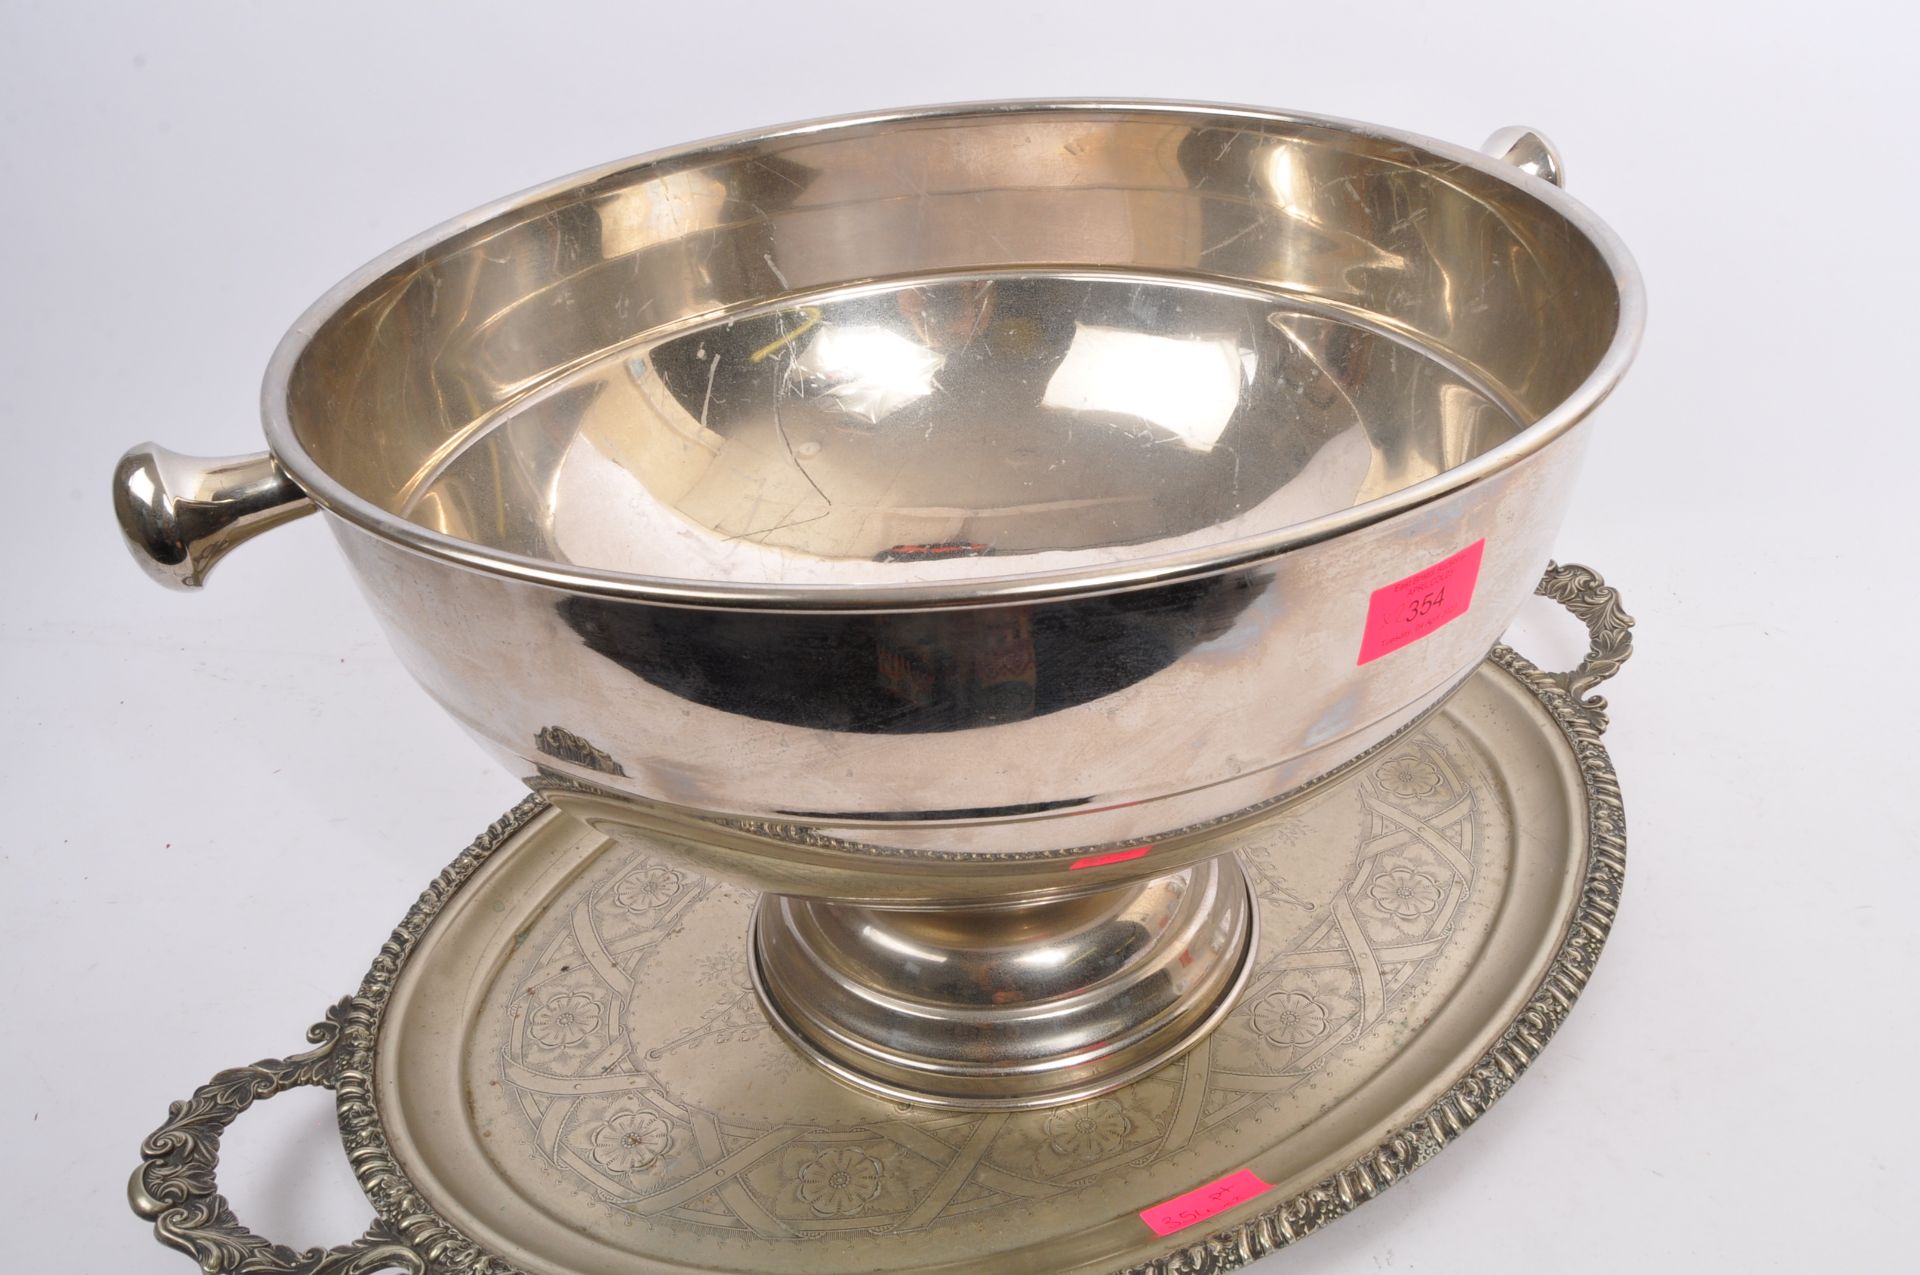 TWO LARGE VINTAGE SILVER PLATED SERVING ITEMS - Image 3 of 6